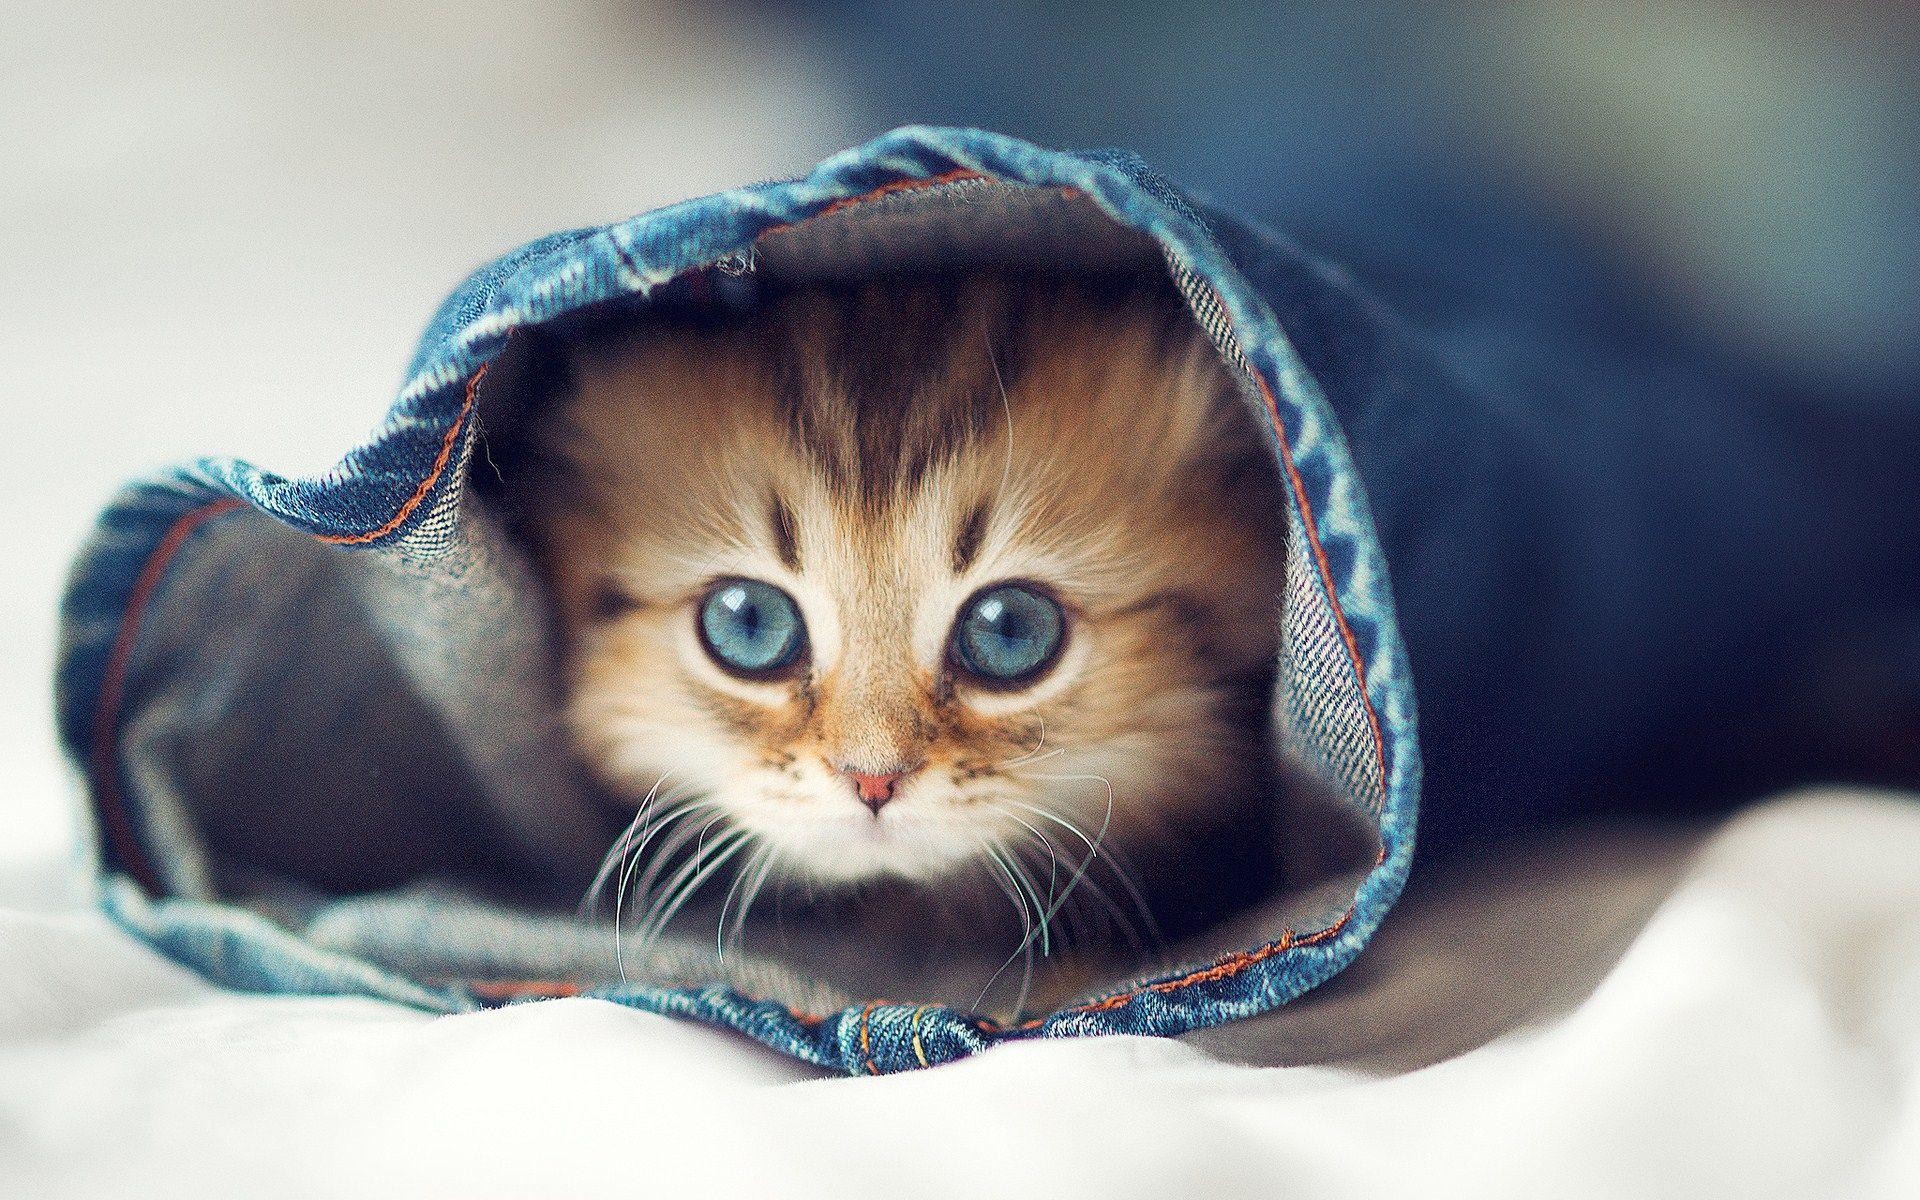 1920x1200 Cute Baby Animal Wallpapers | HD Wallpapers, Backgrounds, Images .